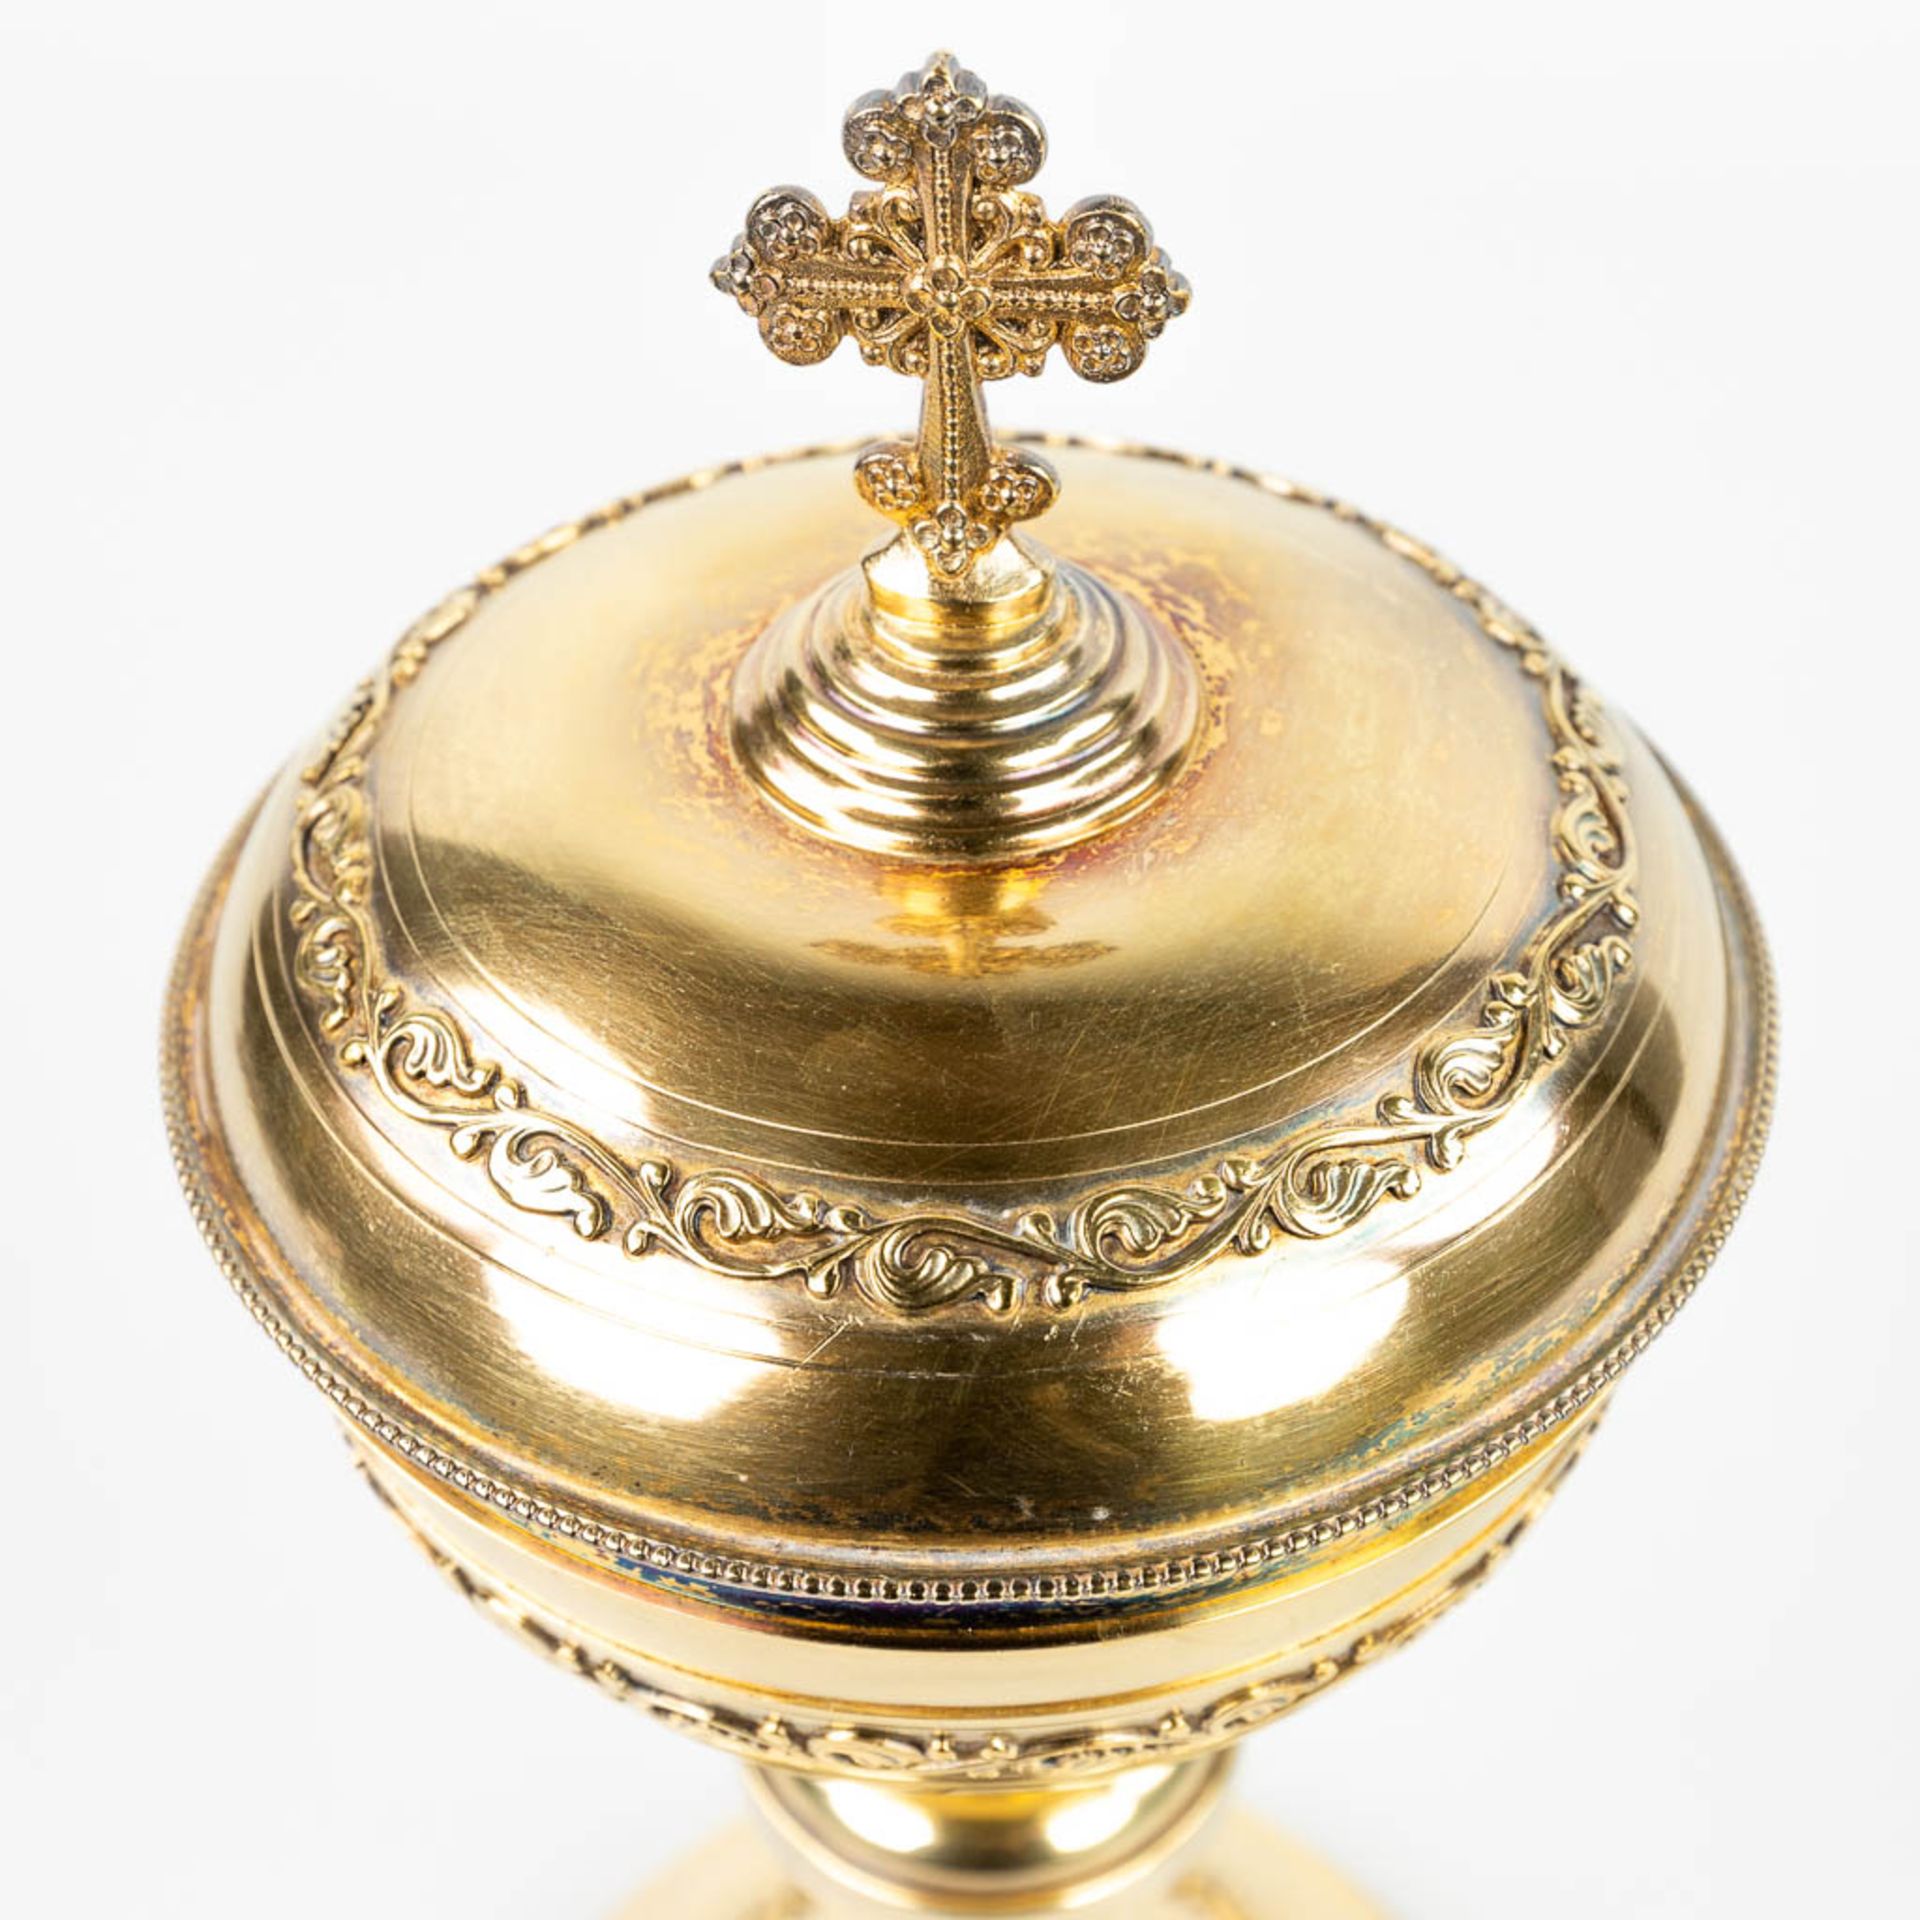 A ciboria made of gold-plated silver and marked VF800. (H:26,5cm) - Image 12 of 12